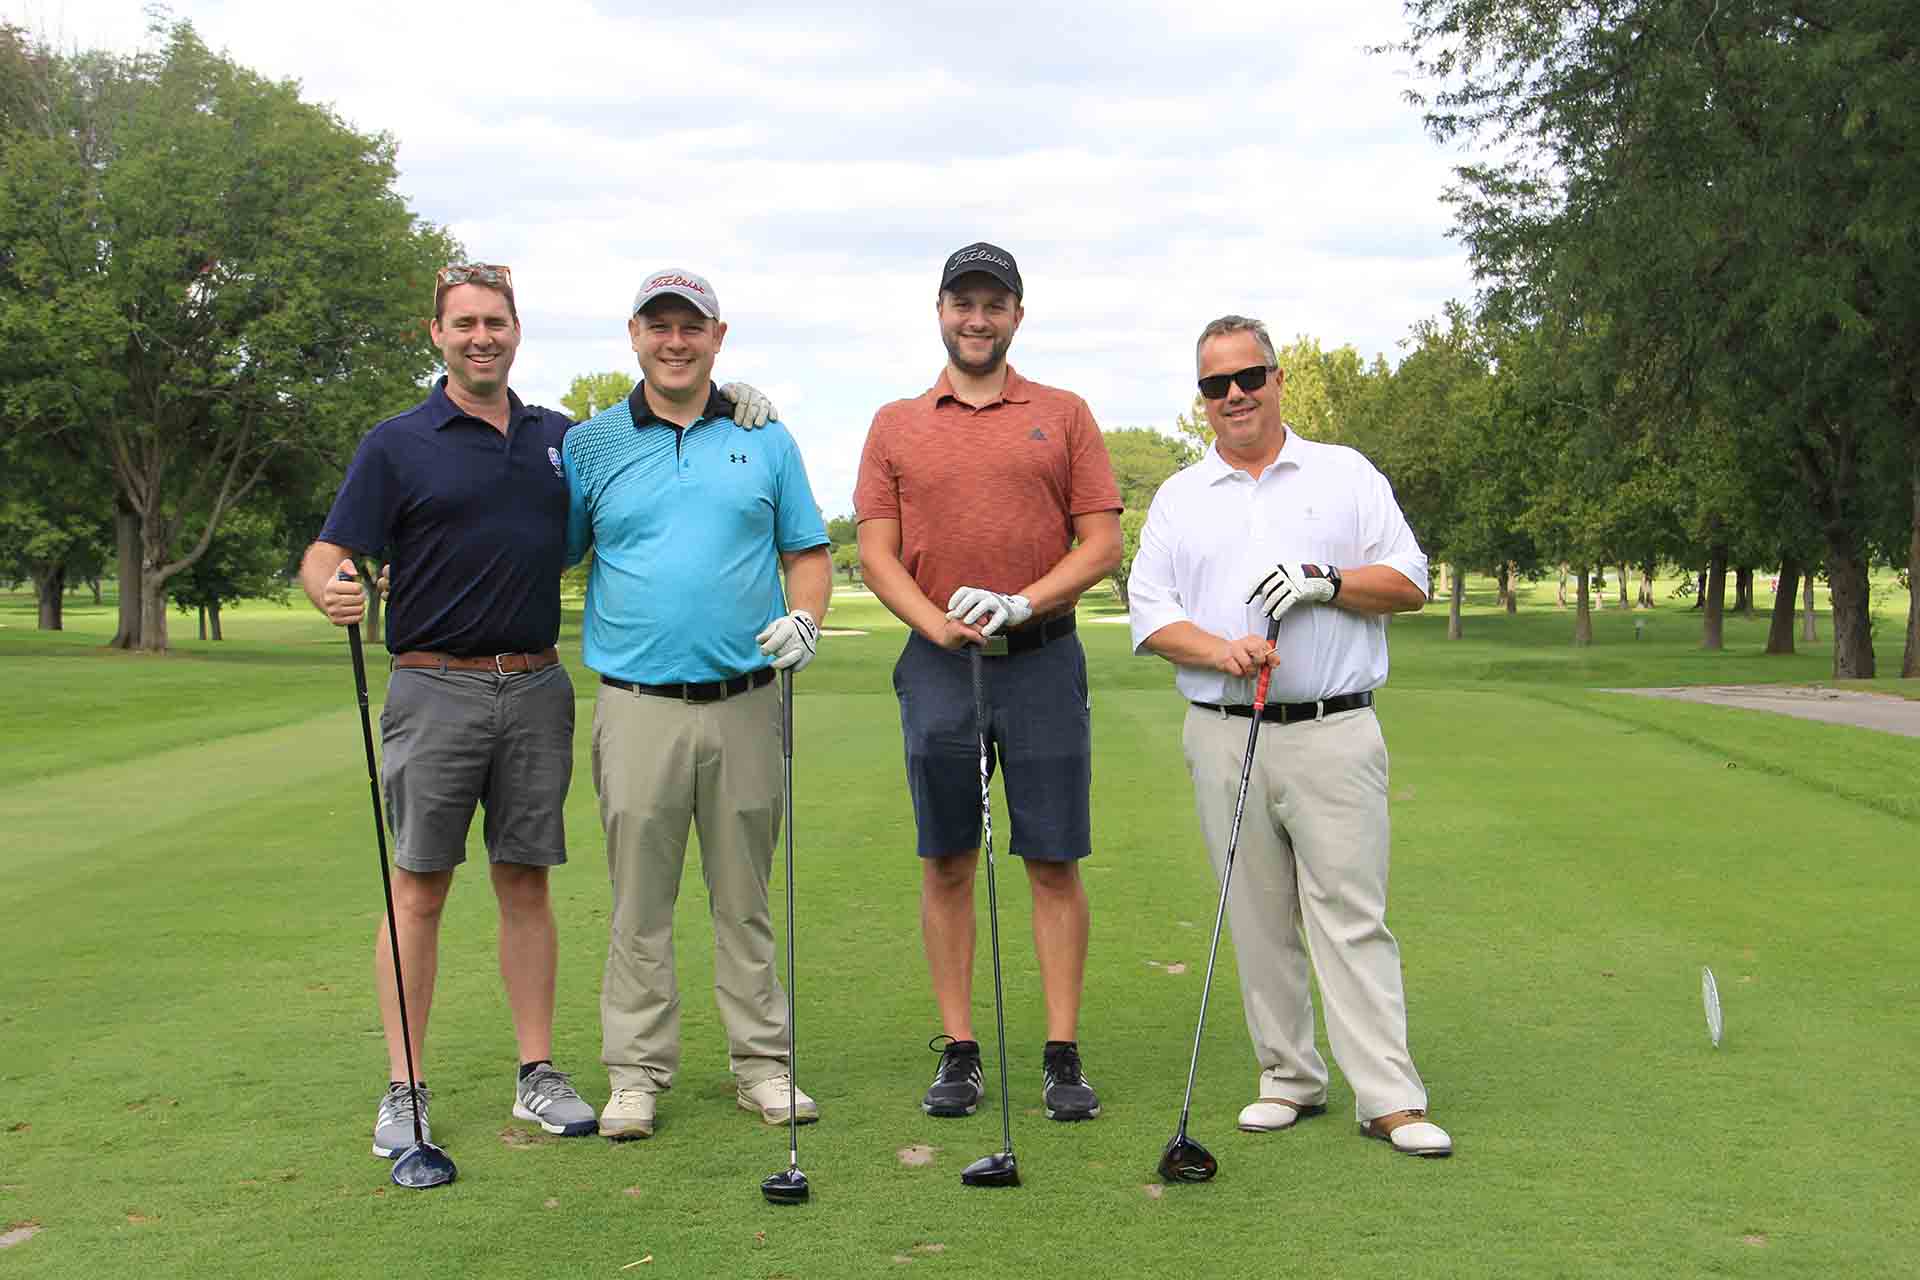 2022-Endowment-Golf-Classic-four-people-pose-on-green-golf-course